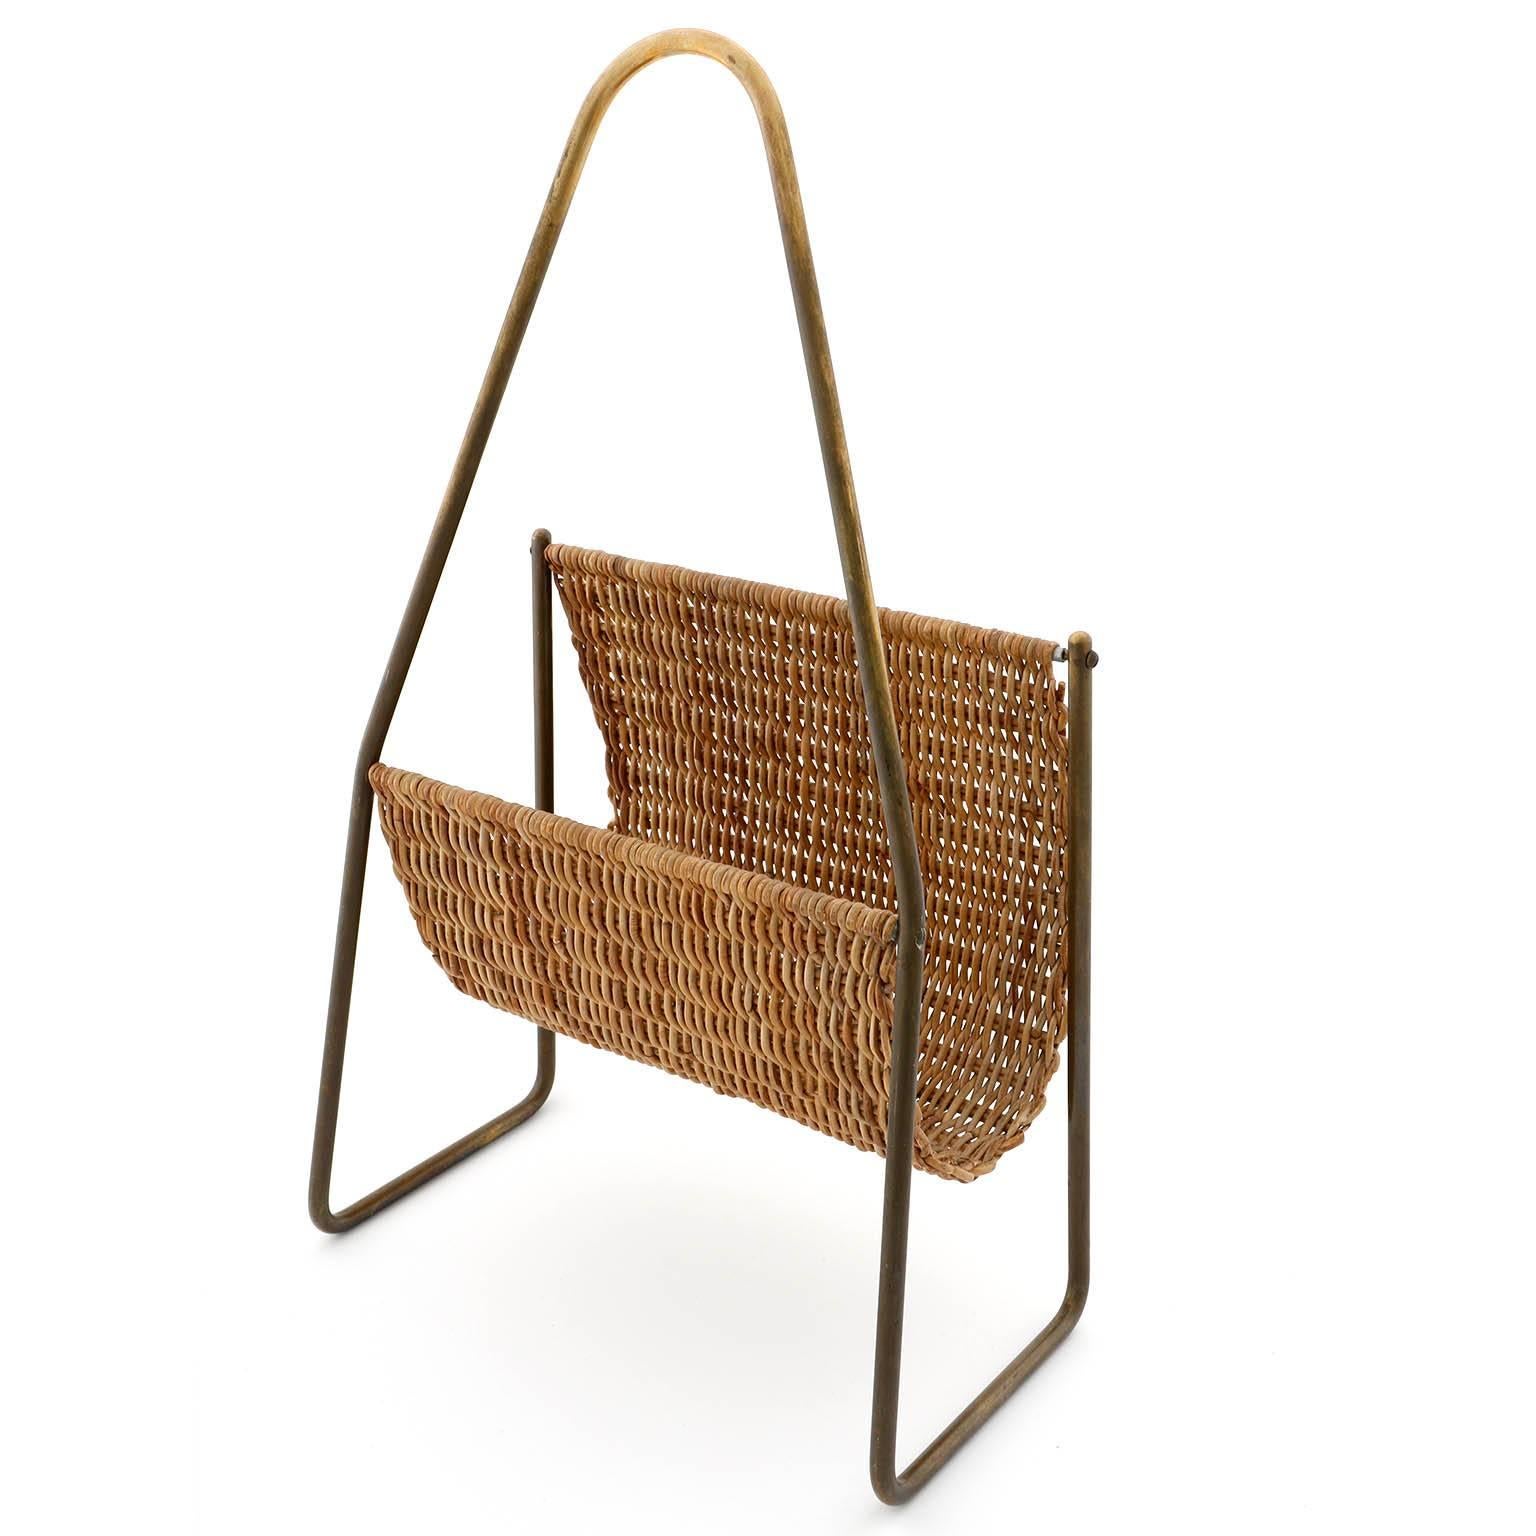 A magazine or newspaper rack designed by Carl Auböck, Vienna, 1950s. 
Excellent original condition with nice patina on brass.

Aubock / Auboeck